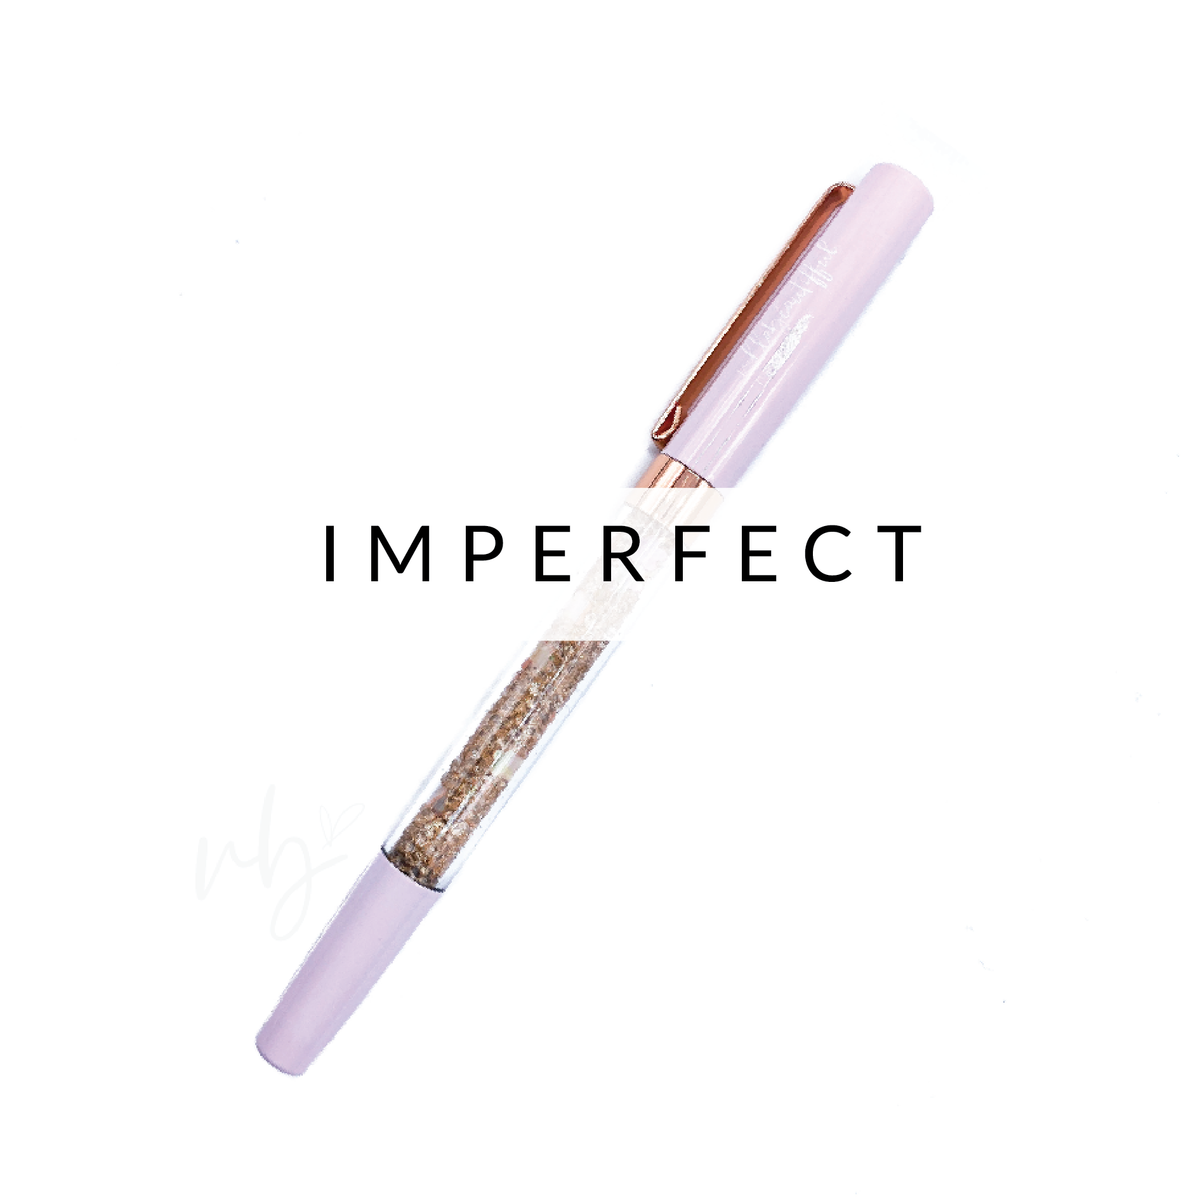 Petunia Imperfect Crystal VBPen | limited pen